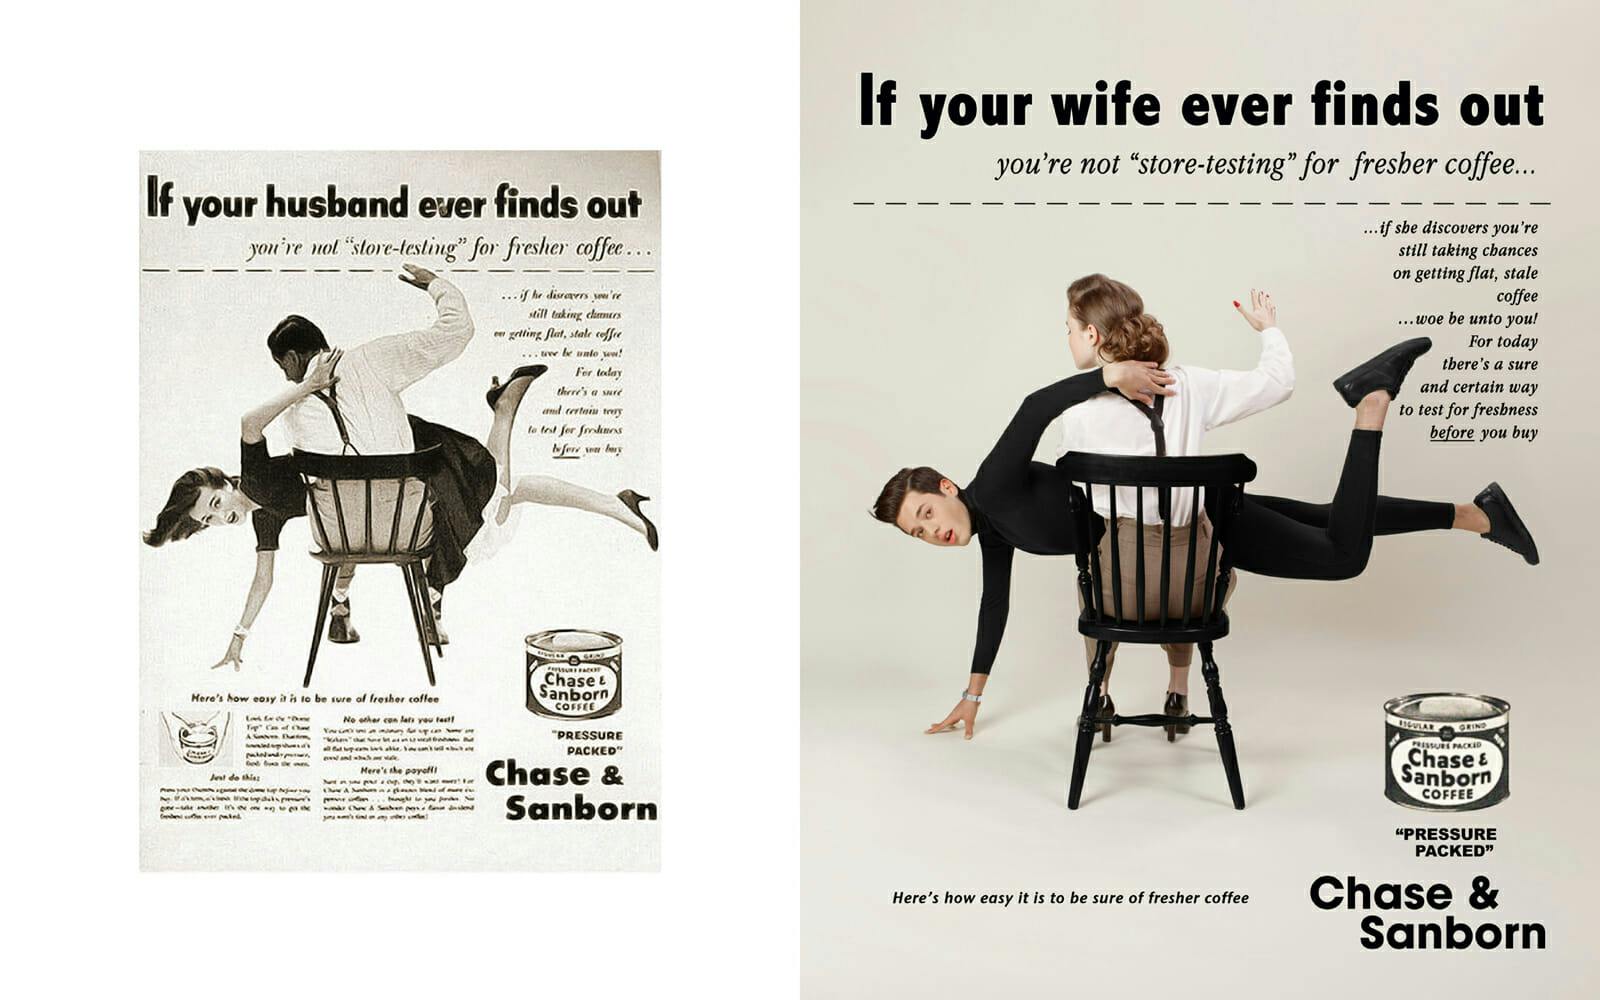 'In a Parallel Universe' satirizes a misogynistic coffee ad.